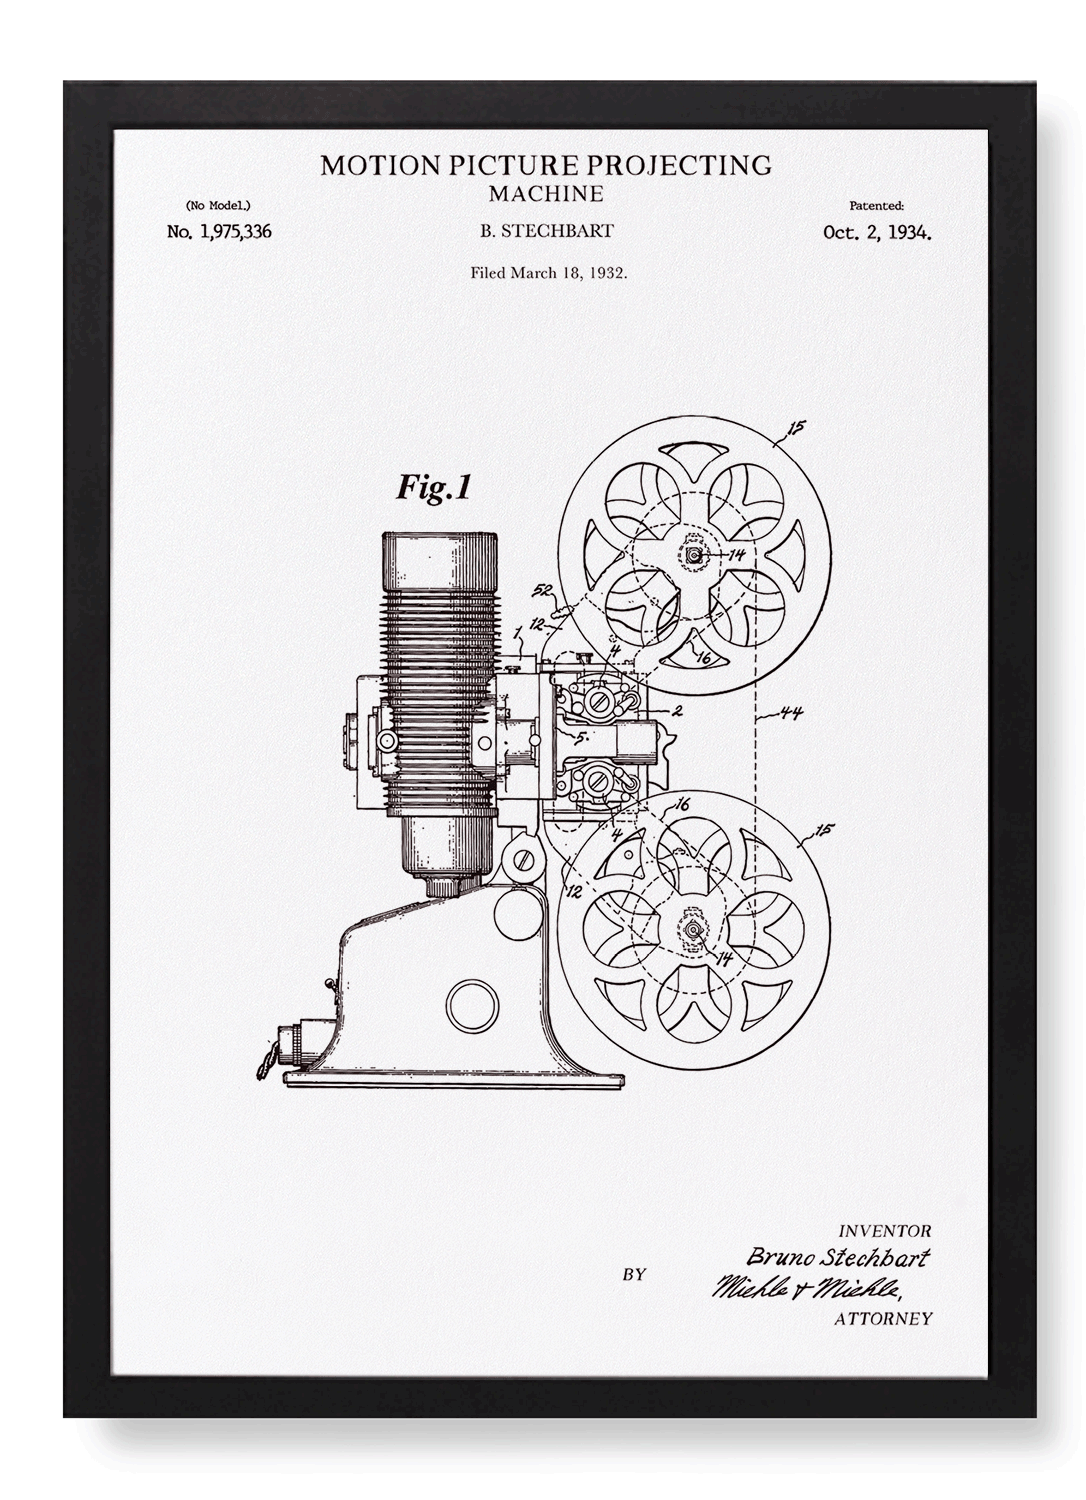 PATENT OF MOTION PICTURE PROJECTING MACHINE (1934)